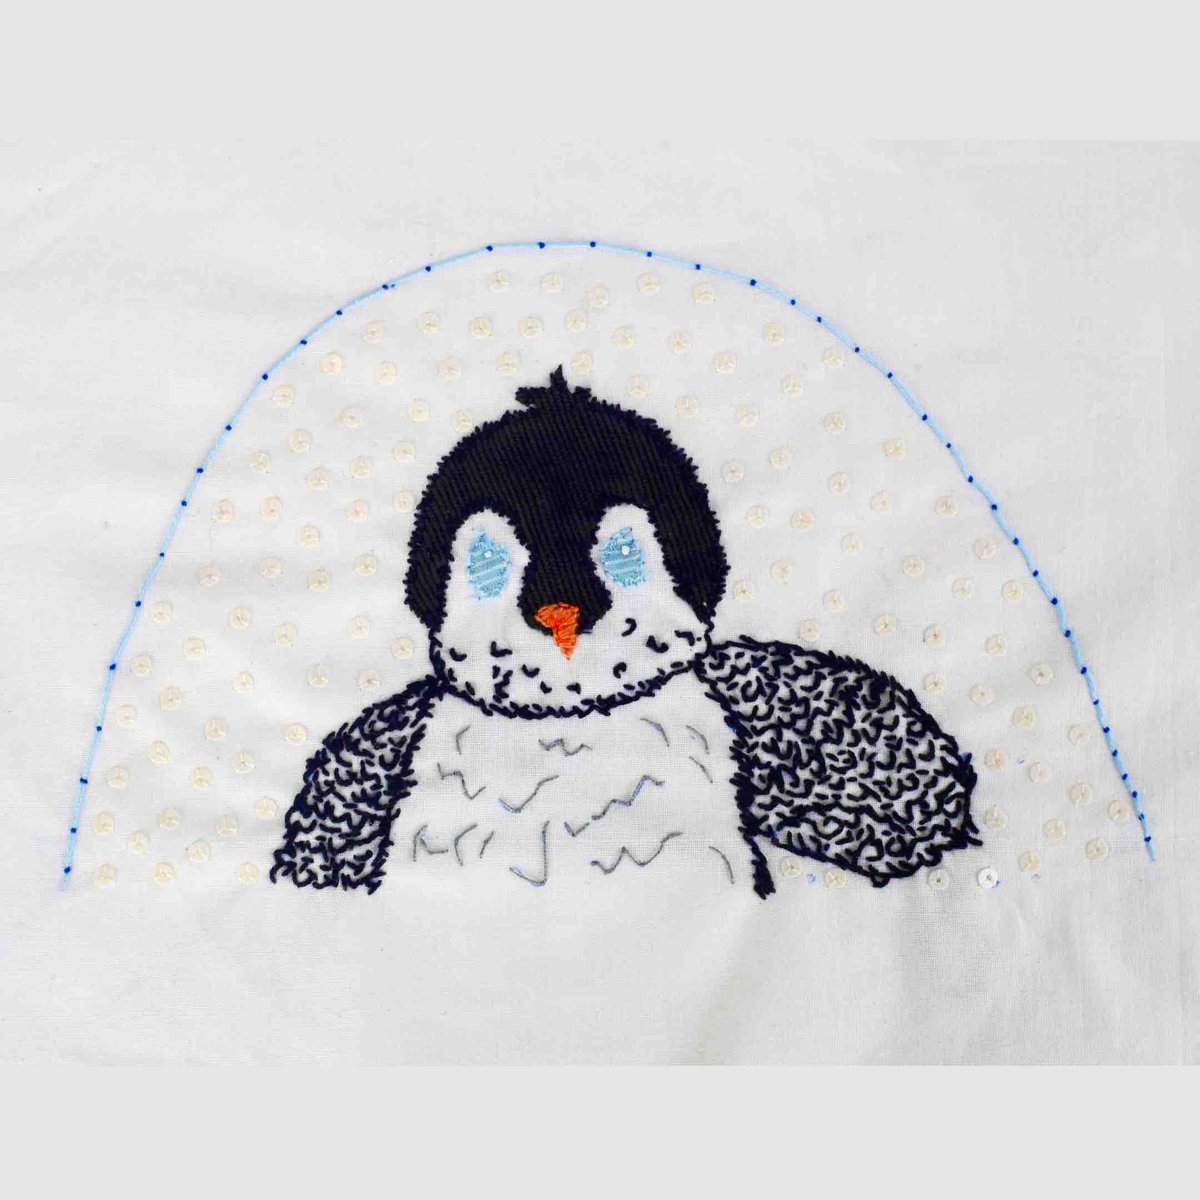 Mondays need more baby penguins! 🐧 Brand new embroidery piece from photographer and textile artist, Emelia Hewitt. 'Morris Morrisons One Penguin', embroidery, 2024. See more of Emelia's work here 👉 buff.ly/44GqtIb